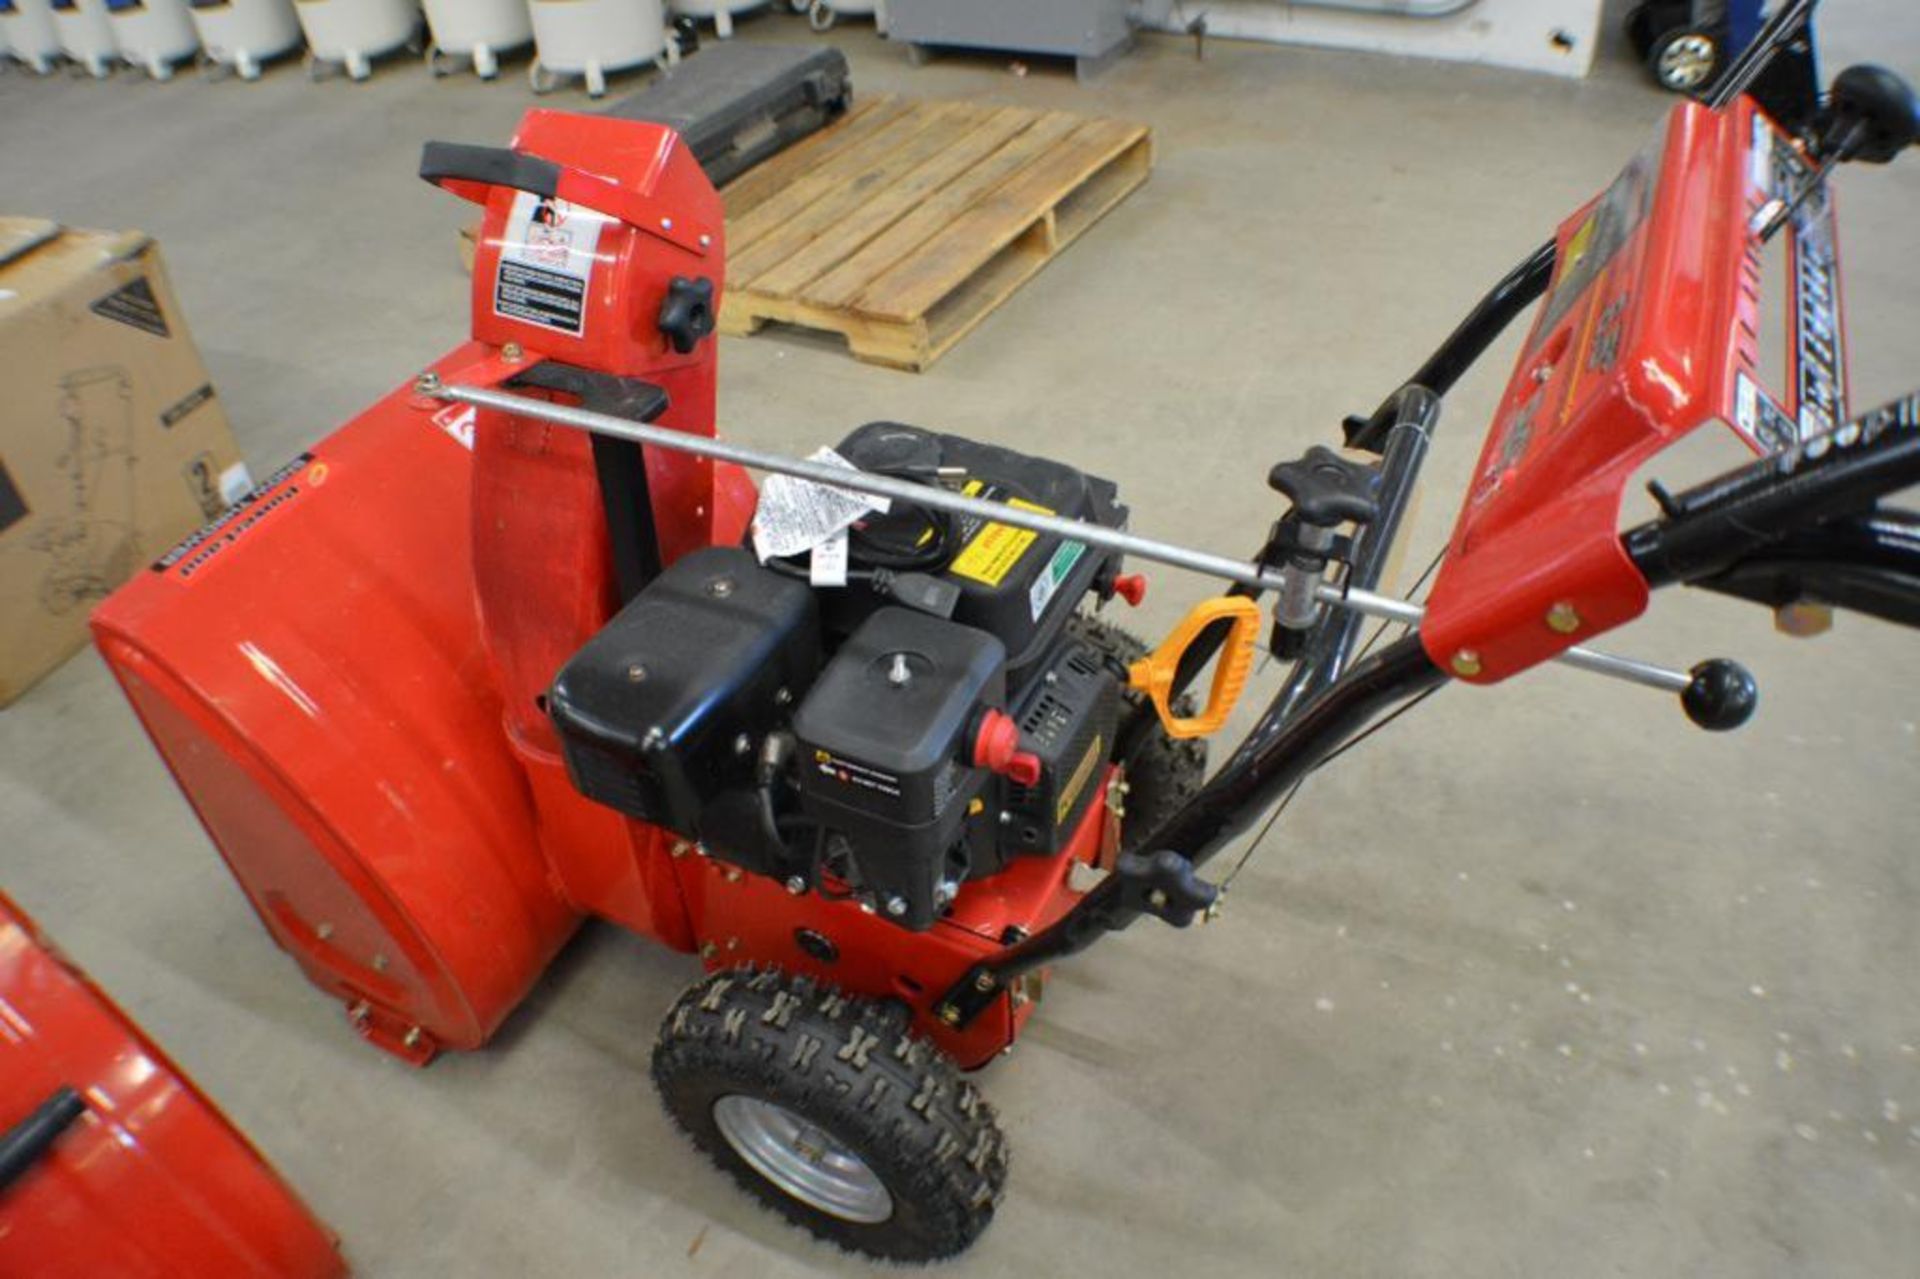 Snow Thrower 24in. 6.5HP with electric Start Engine 4 Stroke by Powerland - Image 3 of 6